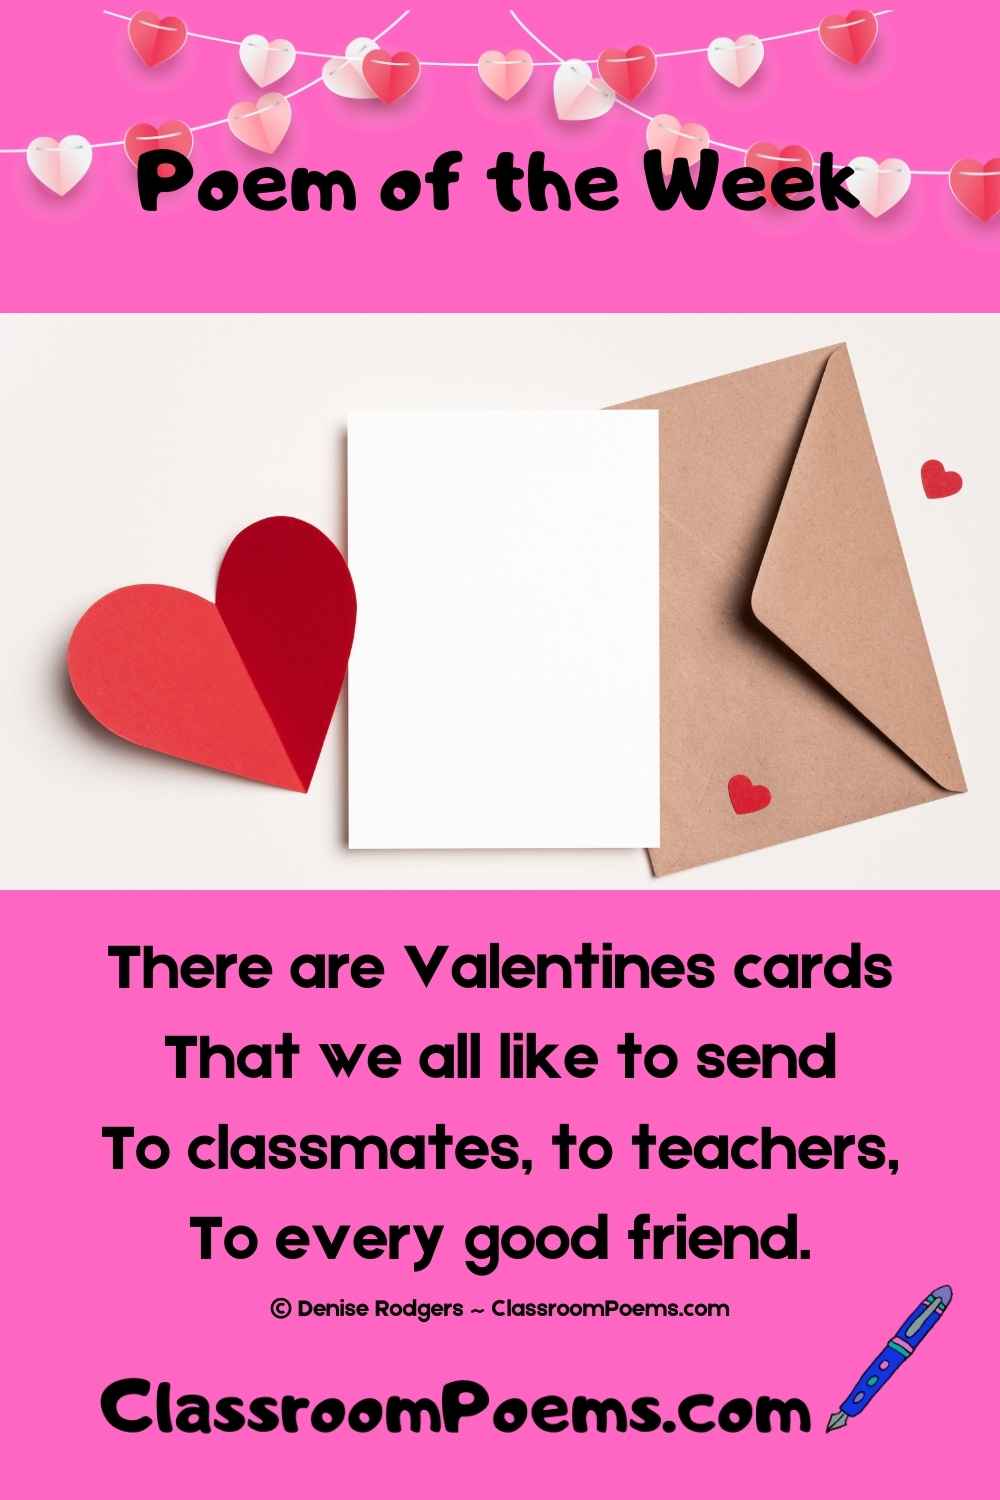 A Valentine's Day poem for kids by Denise Rodgers on ClassroomPoems.com.